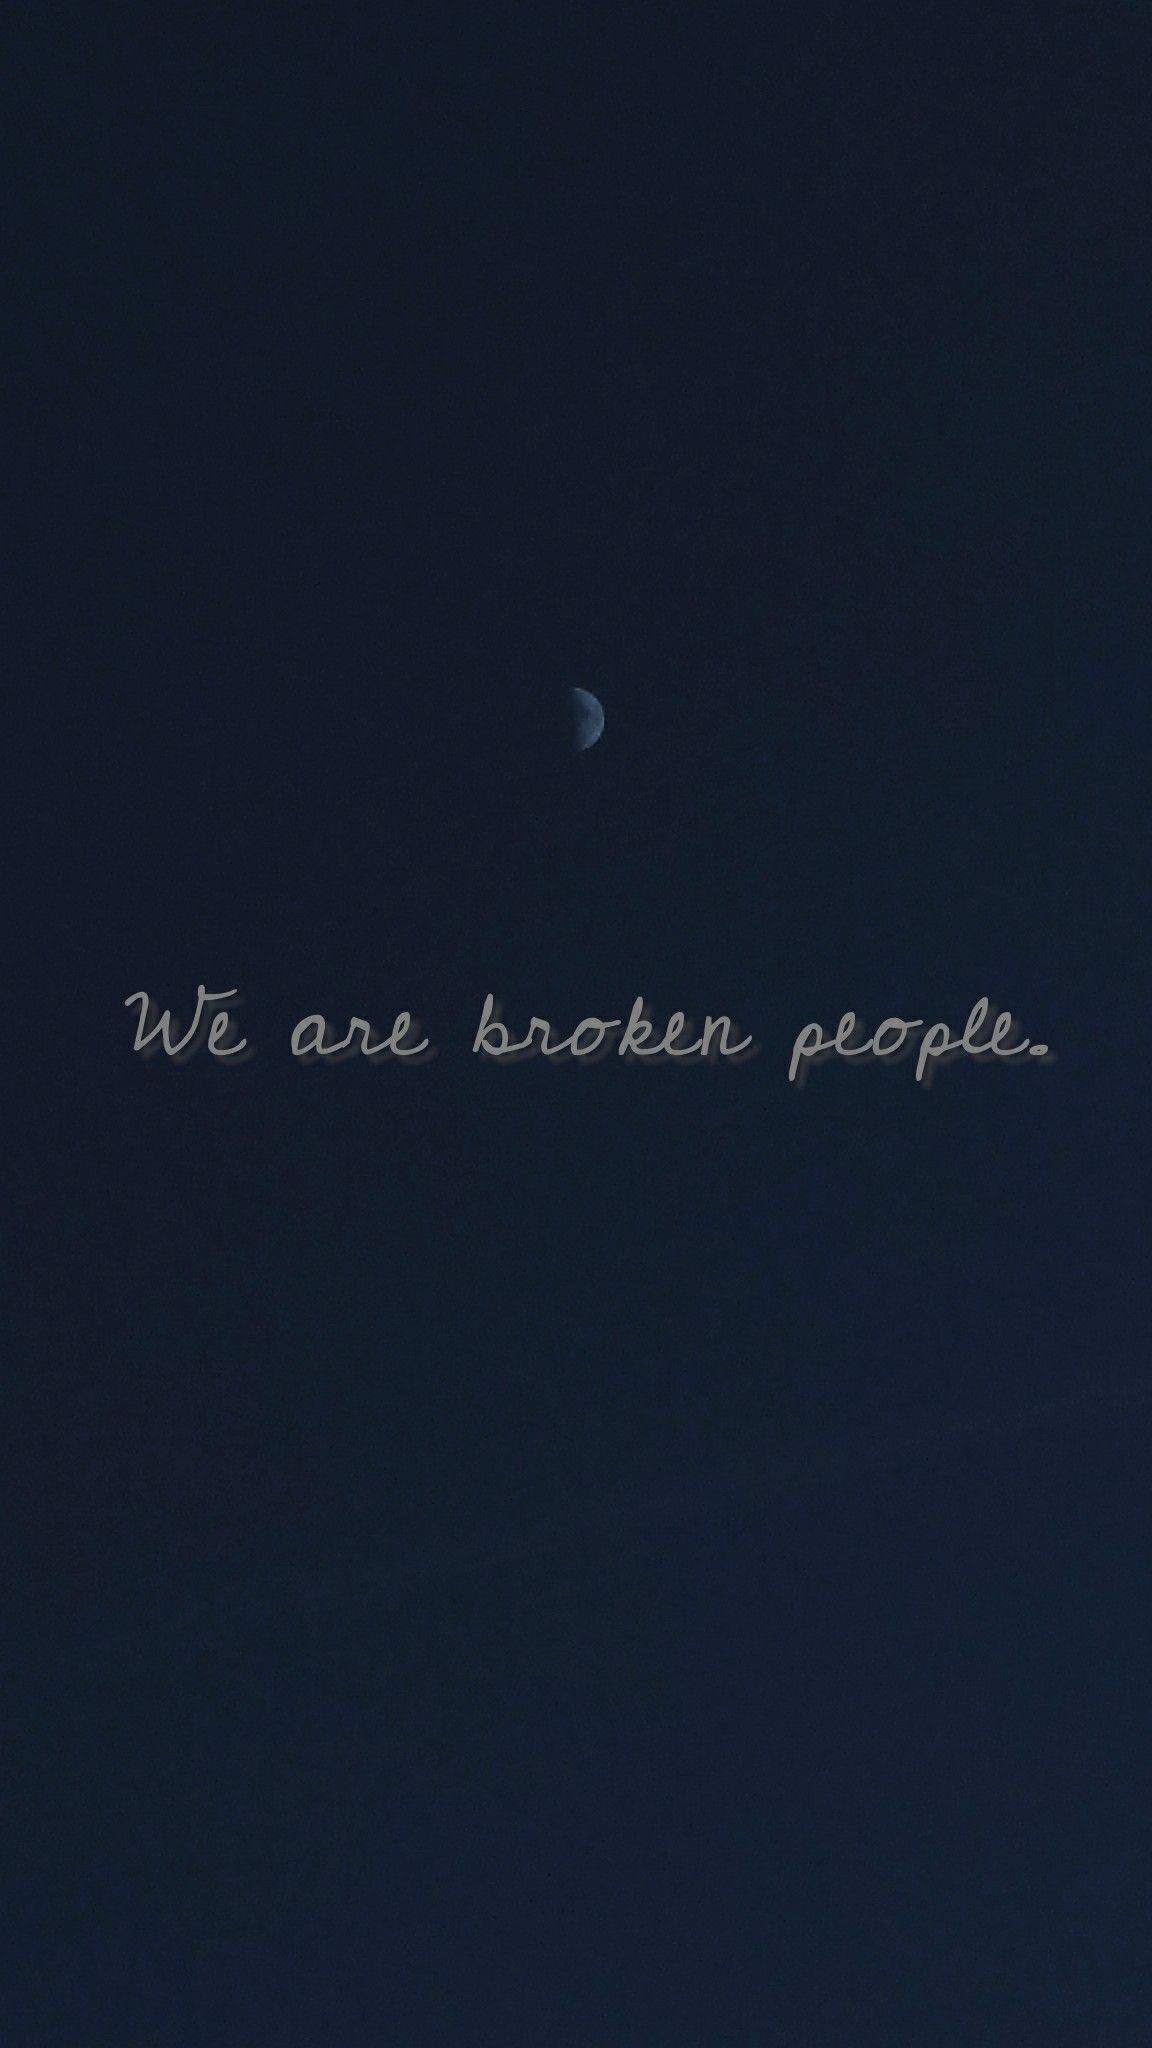 A dark blue background with a white moon in the top middle and the words 